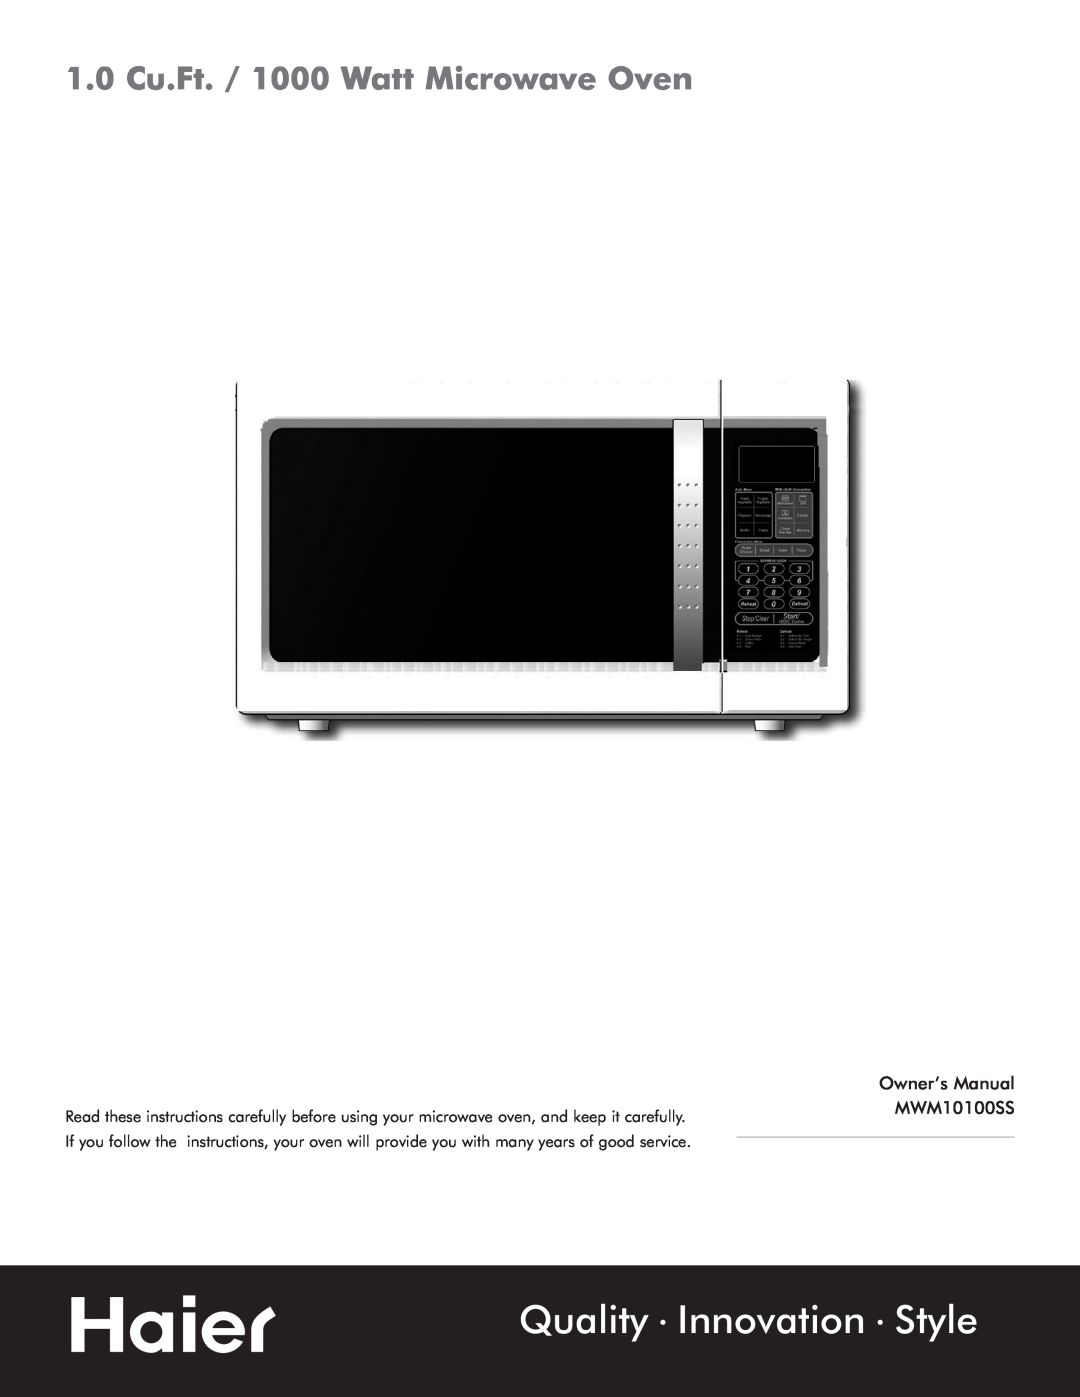 Haier MWM10100SS owner manual Quality Innovation Style, 1.0 Cu.Ft. / 1000 Watt Microwave Oven 